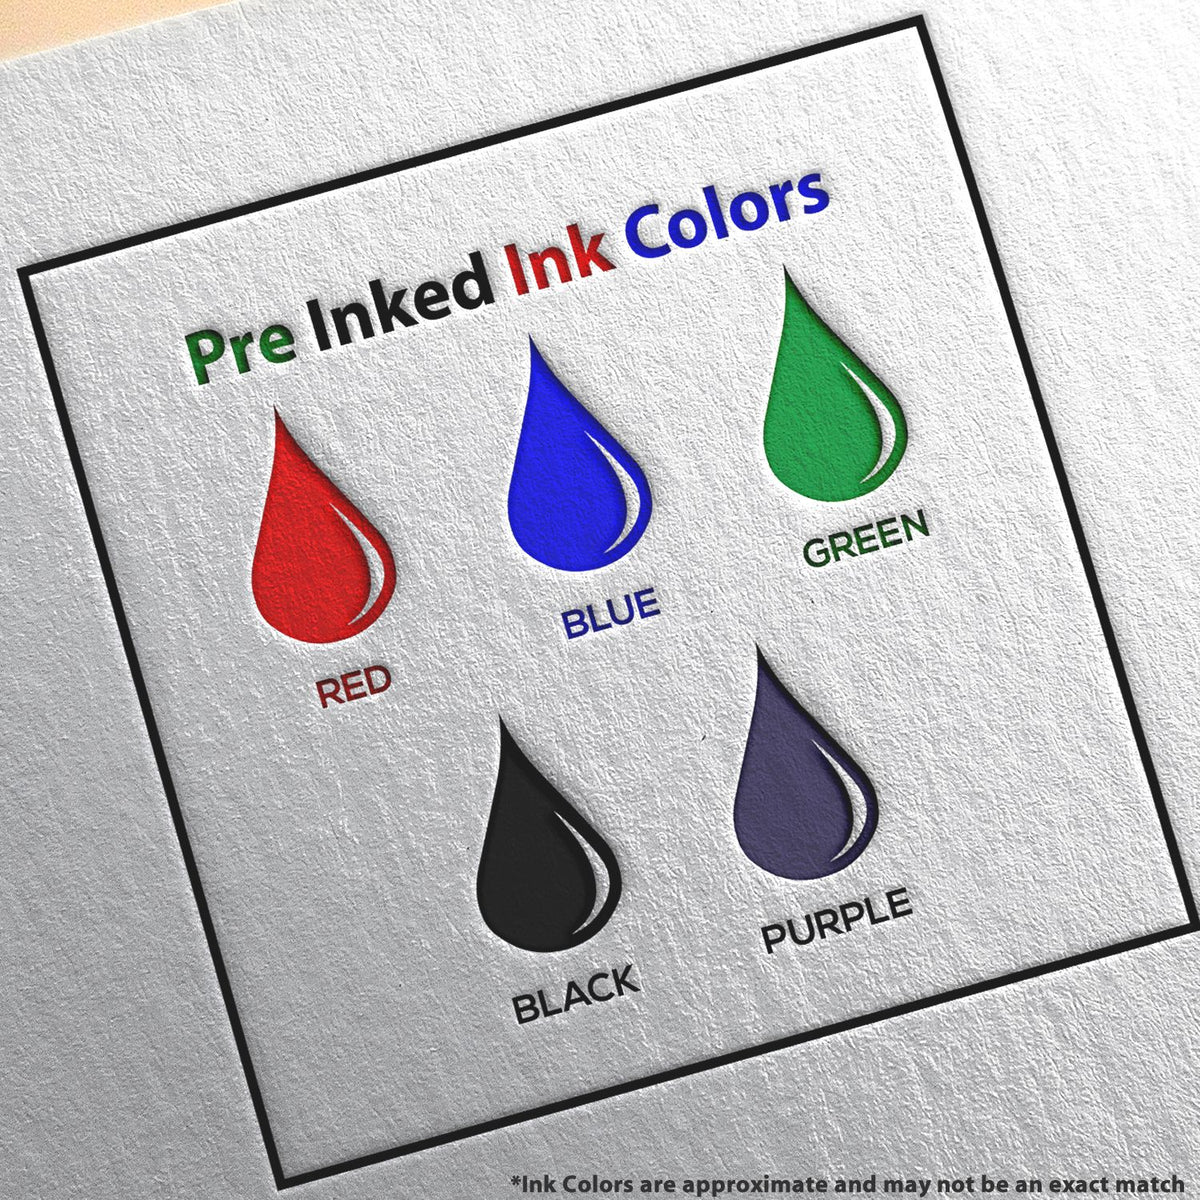 A picture showing the different ink colors or hues available for the Premium MaxLight Pre-Inked North Dakota Landscape Architectural Stamp product.